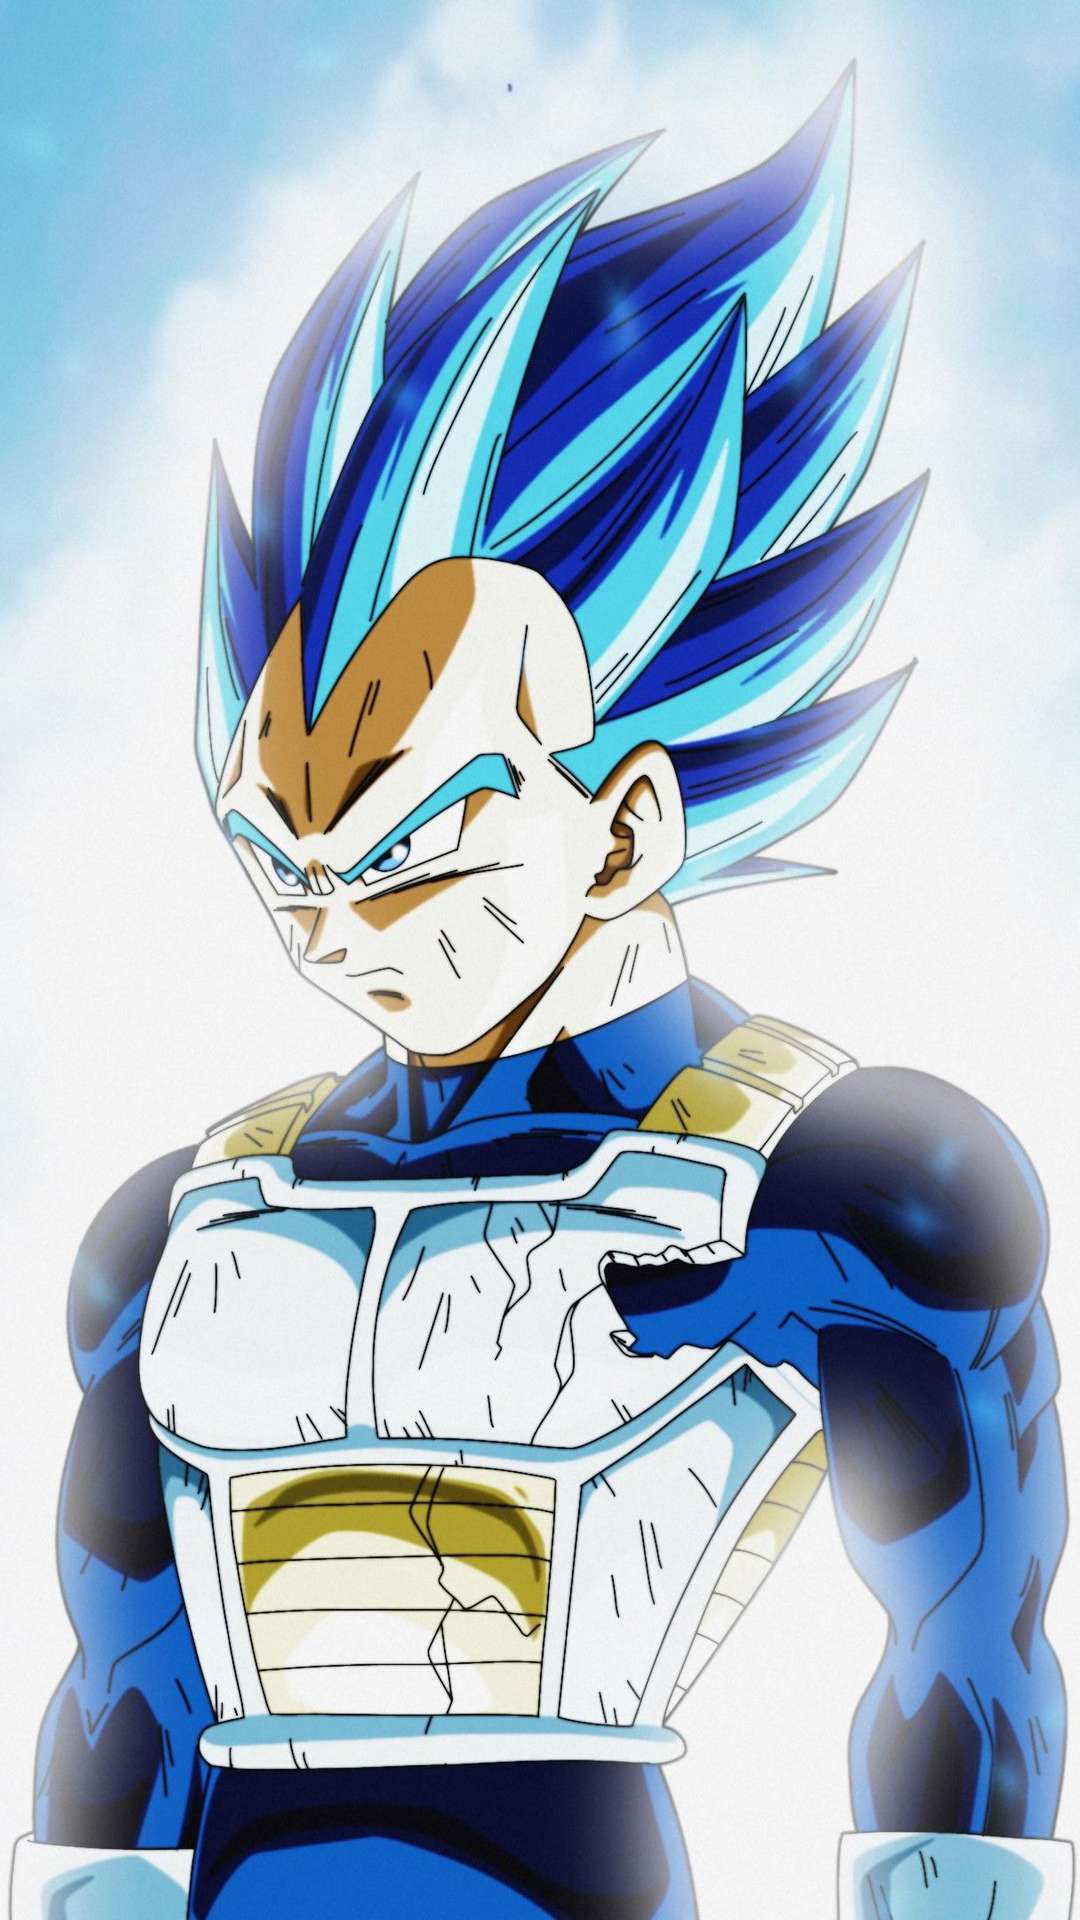 145 Vegeta Wallpapers for iPhone and Android by Zachary Combs